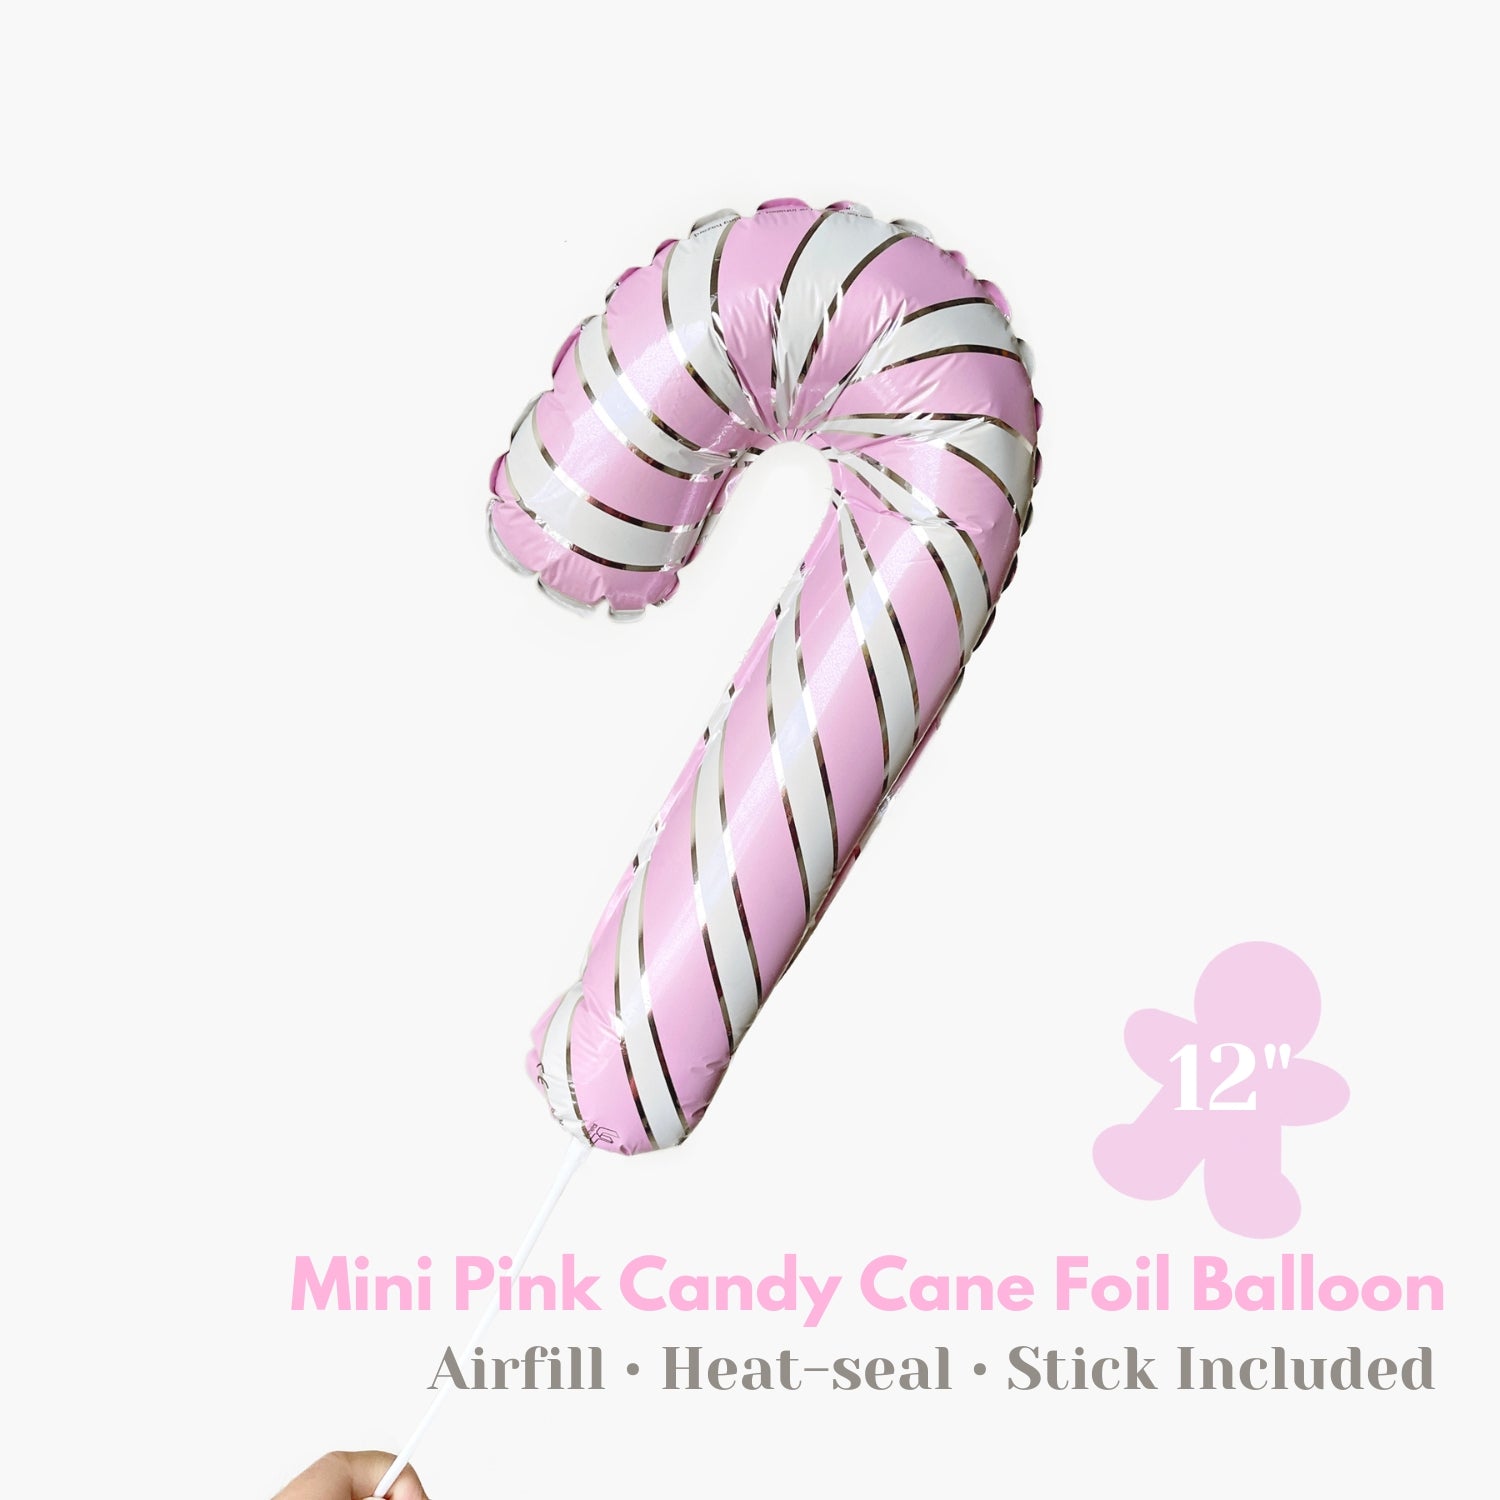 Mini Air-fill Pink Silver Candy Cane Foil Balloon 12" - Christmas Party Loot Bag Party Favor - Winter Holiday Photo Prop